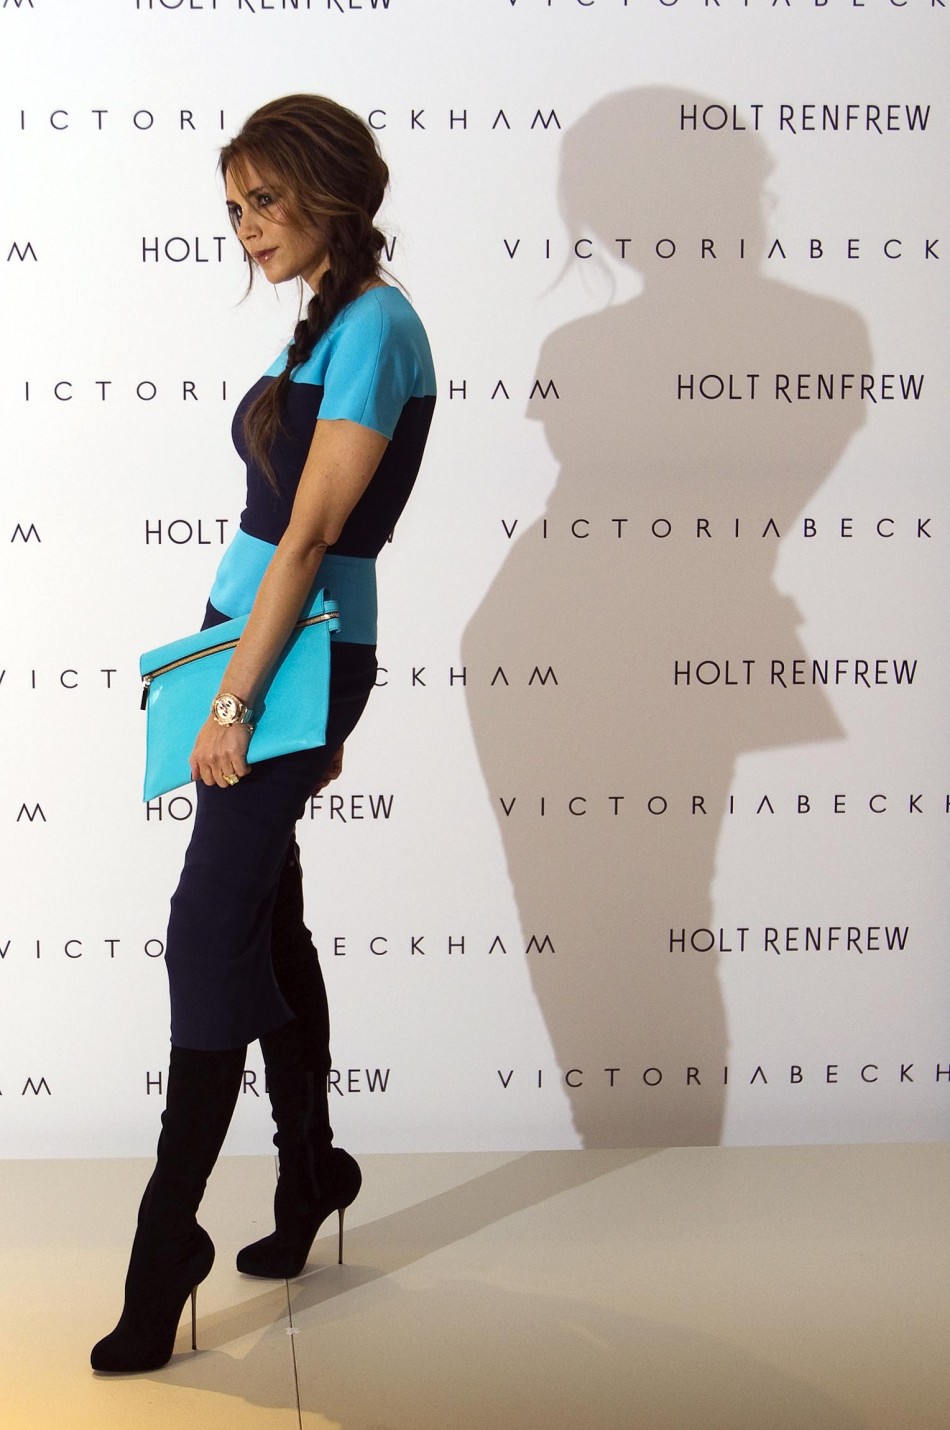 Victoria Beckham poses for the media and fans at Holt Renfrew Vancouver while in town prompting her fashion line in Vancouver